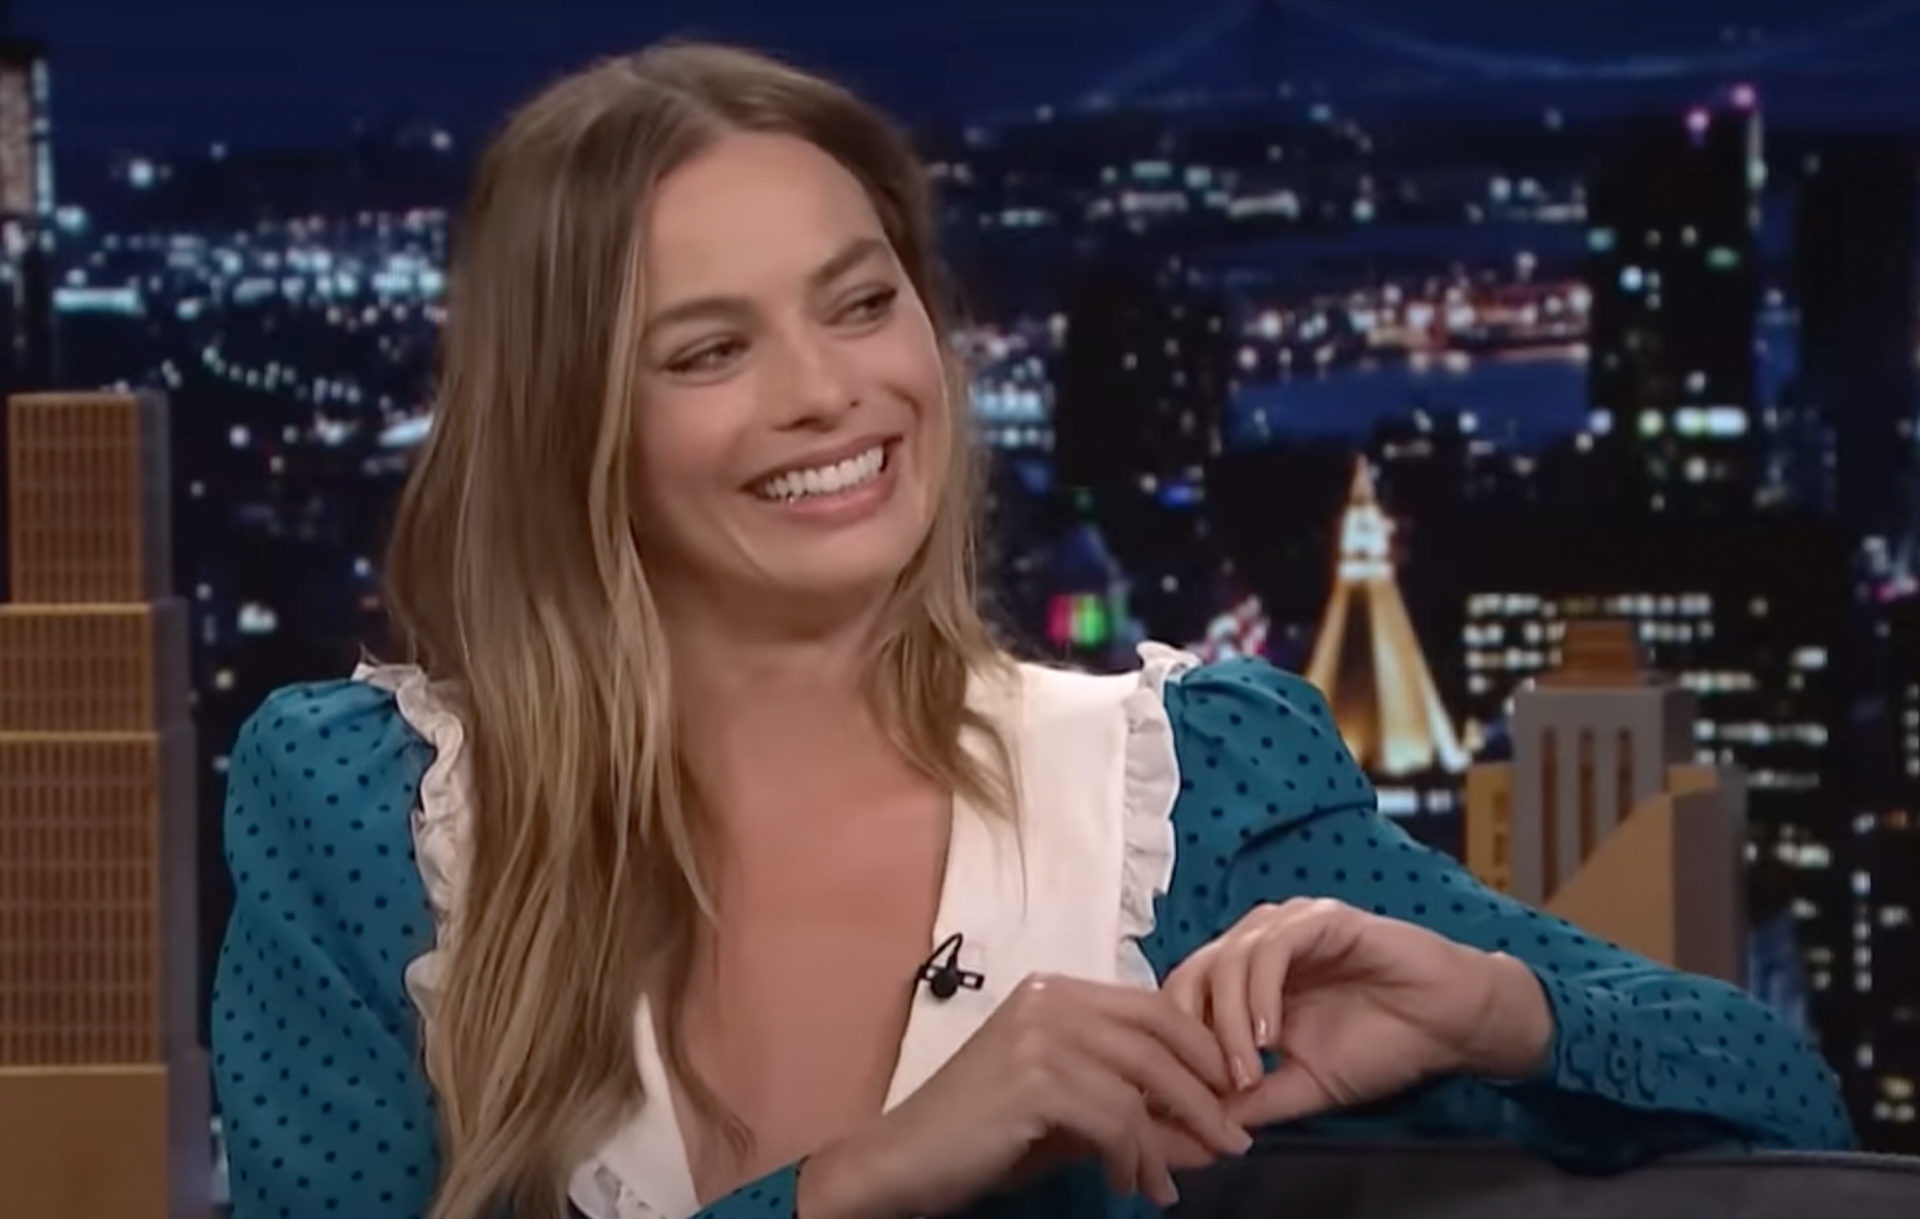 christine kellaway recommends margot robbie leaked photos pic